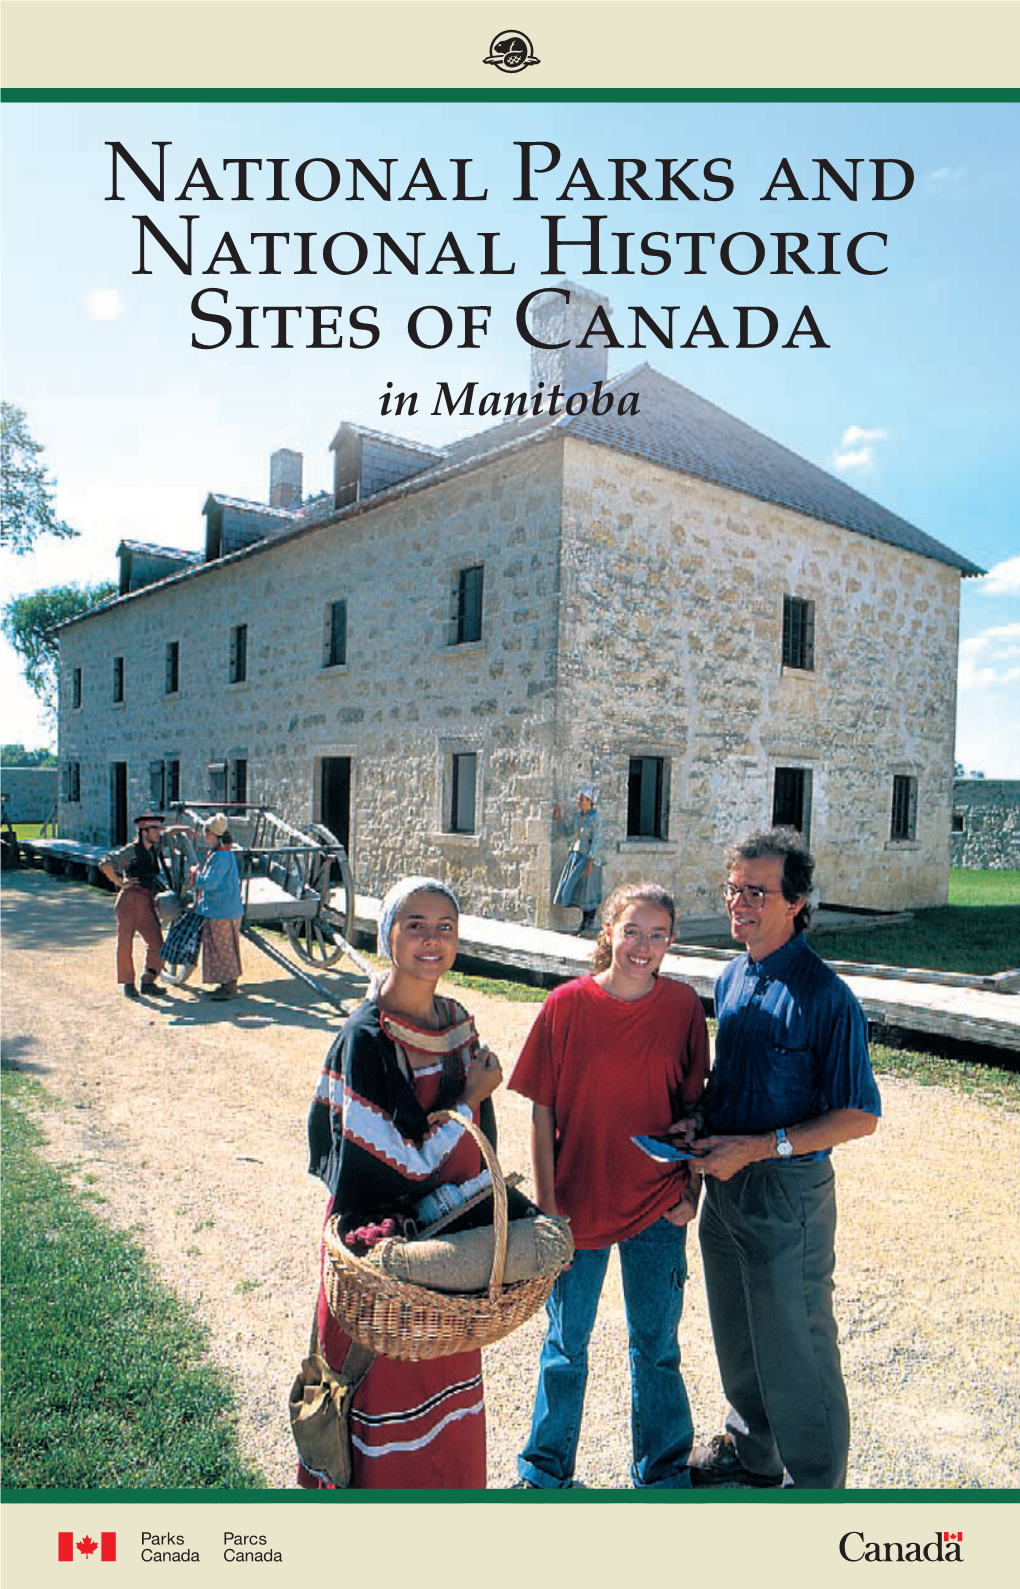 National Parks and National Historic Sites of Canada